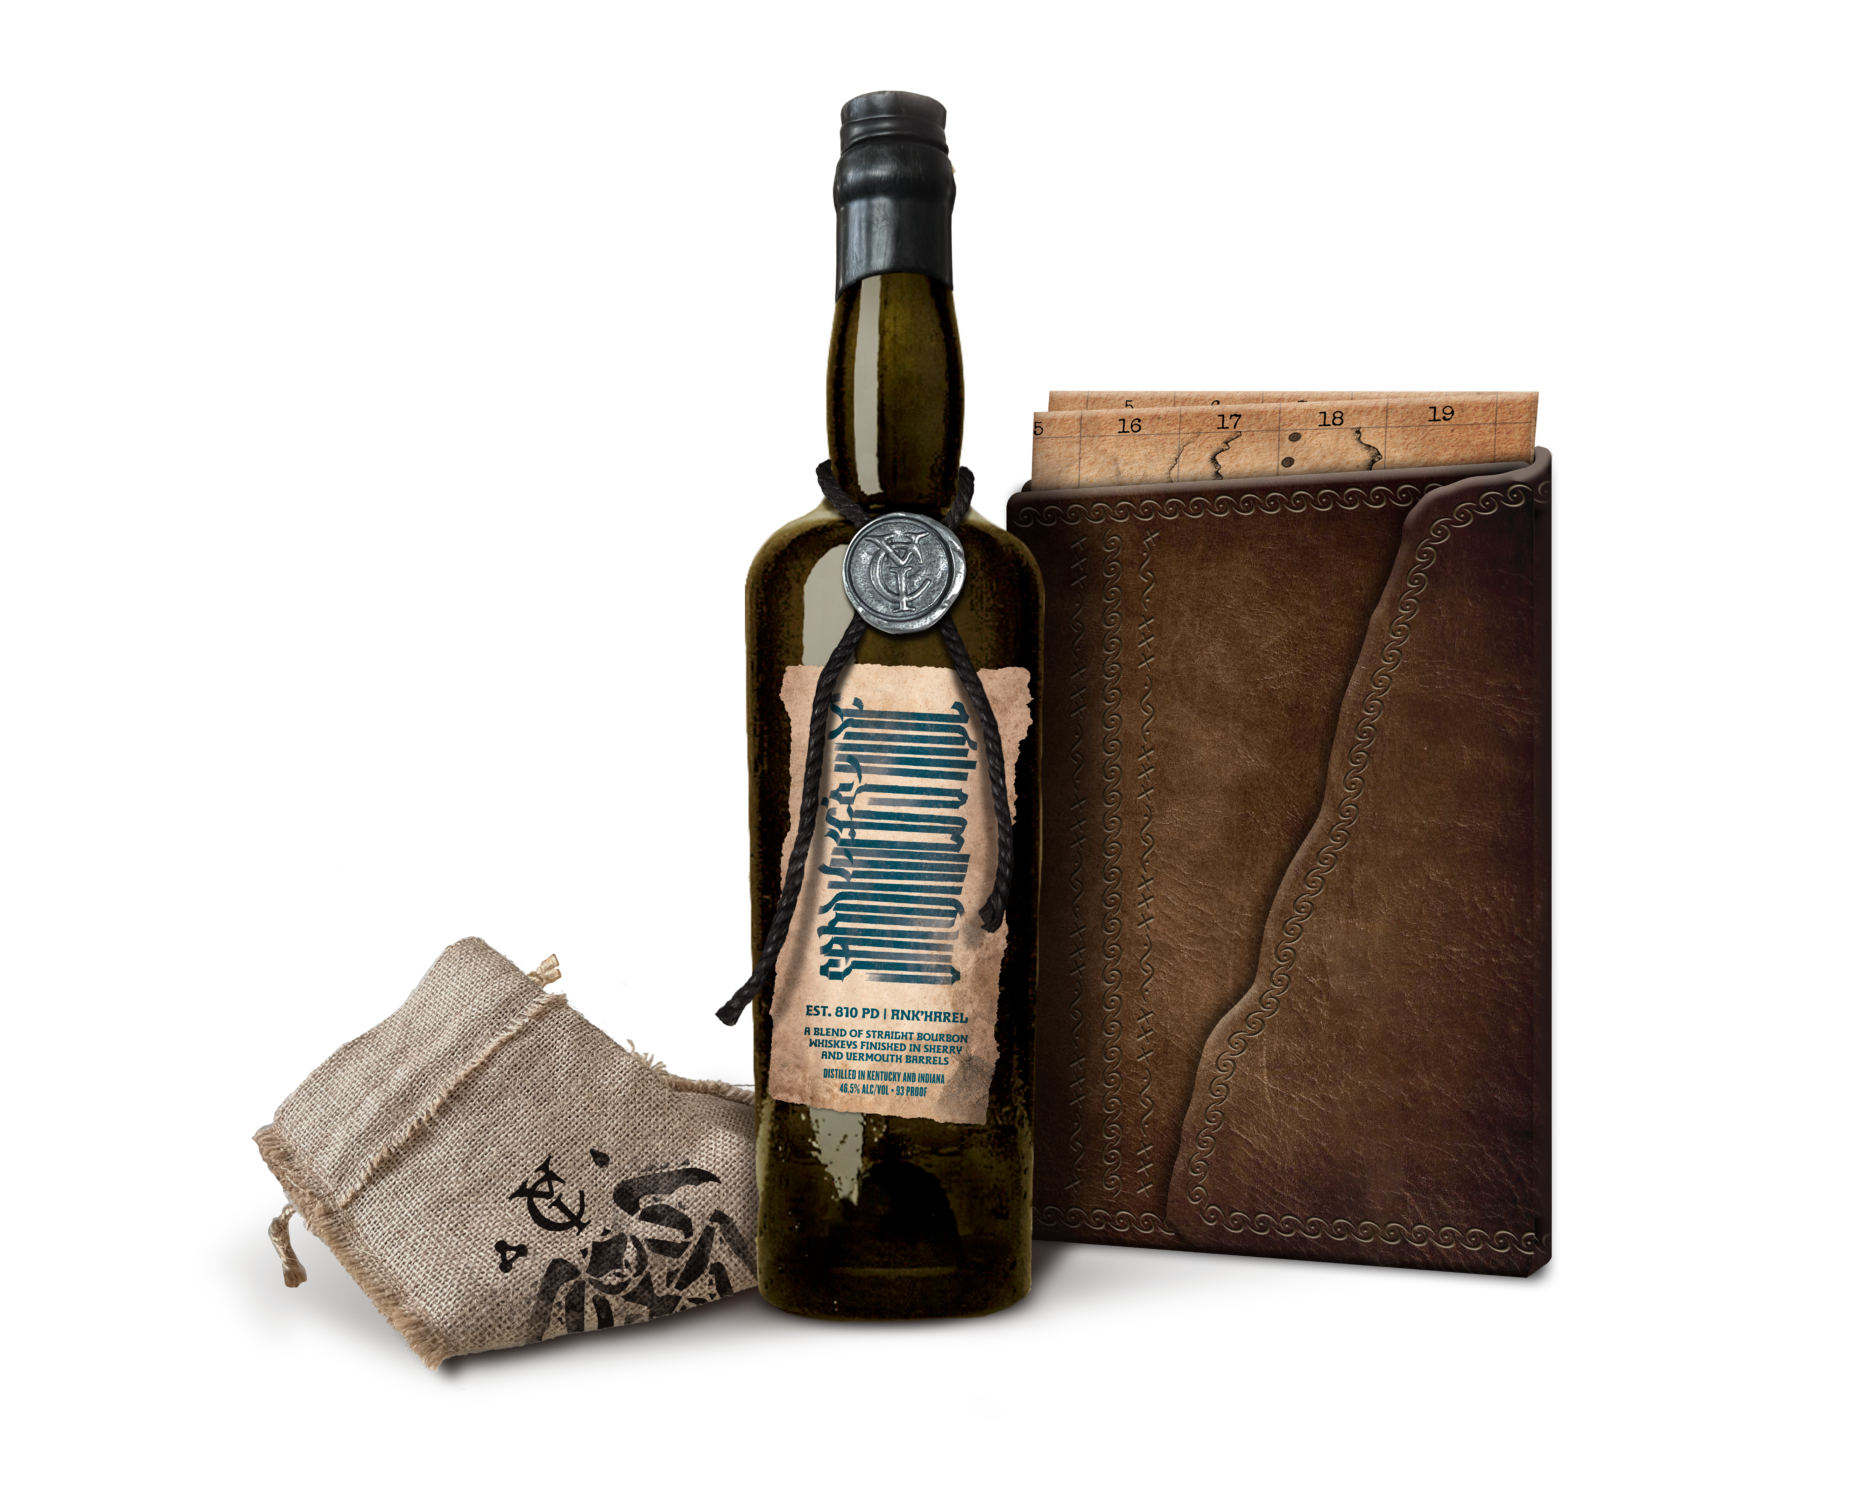 Bottle next to journal and bag